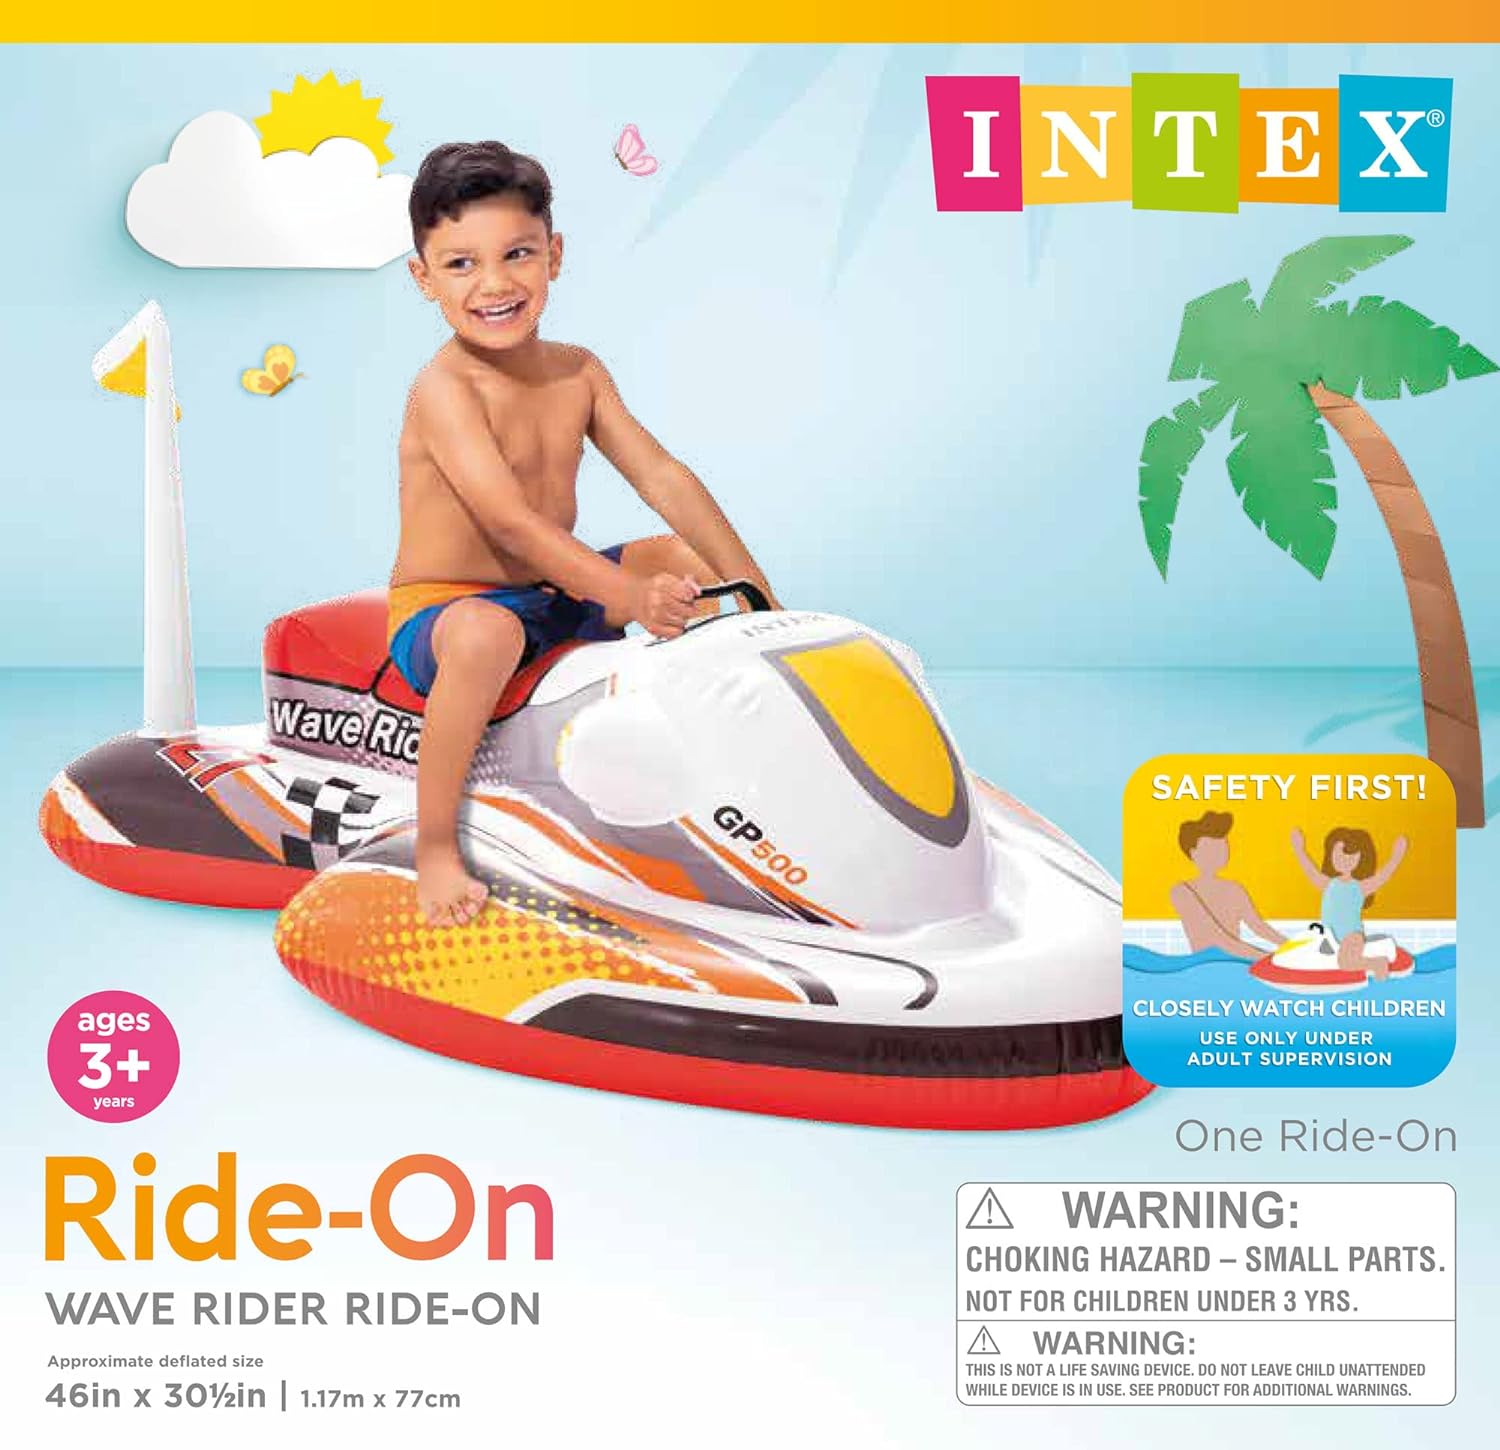 Wave Runner Ride-on Age 3+